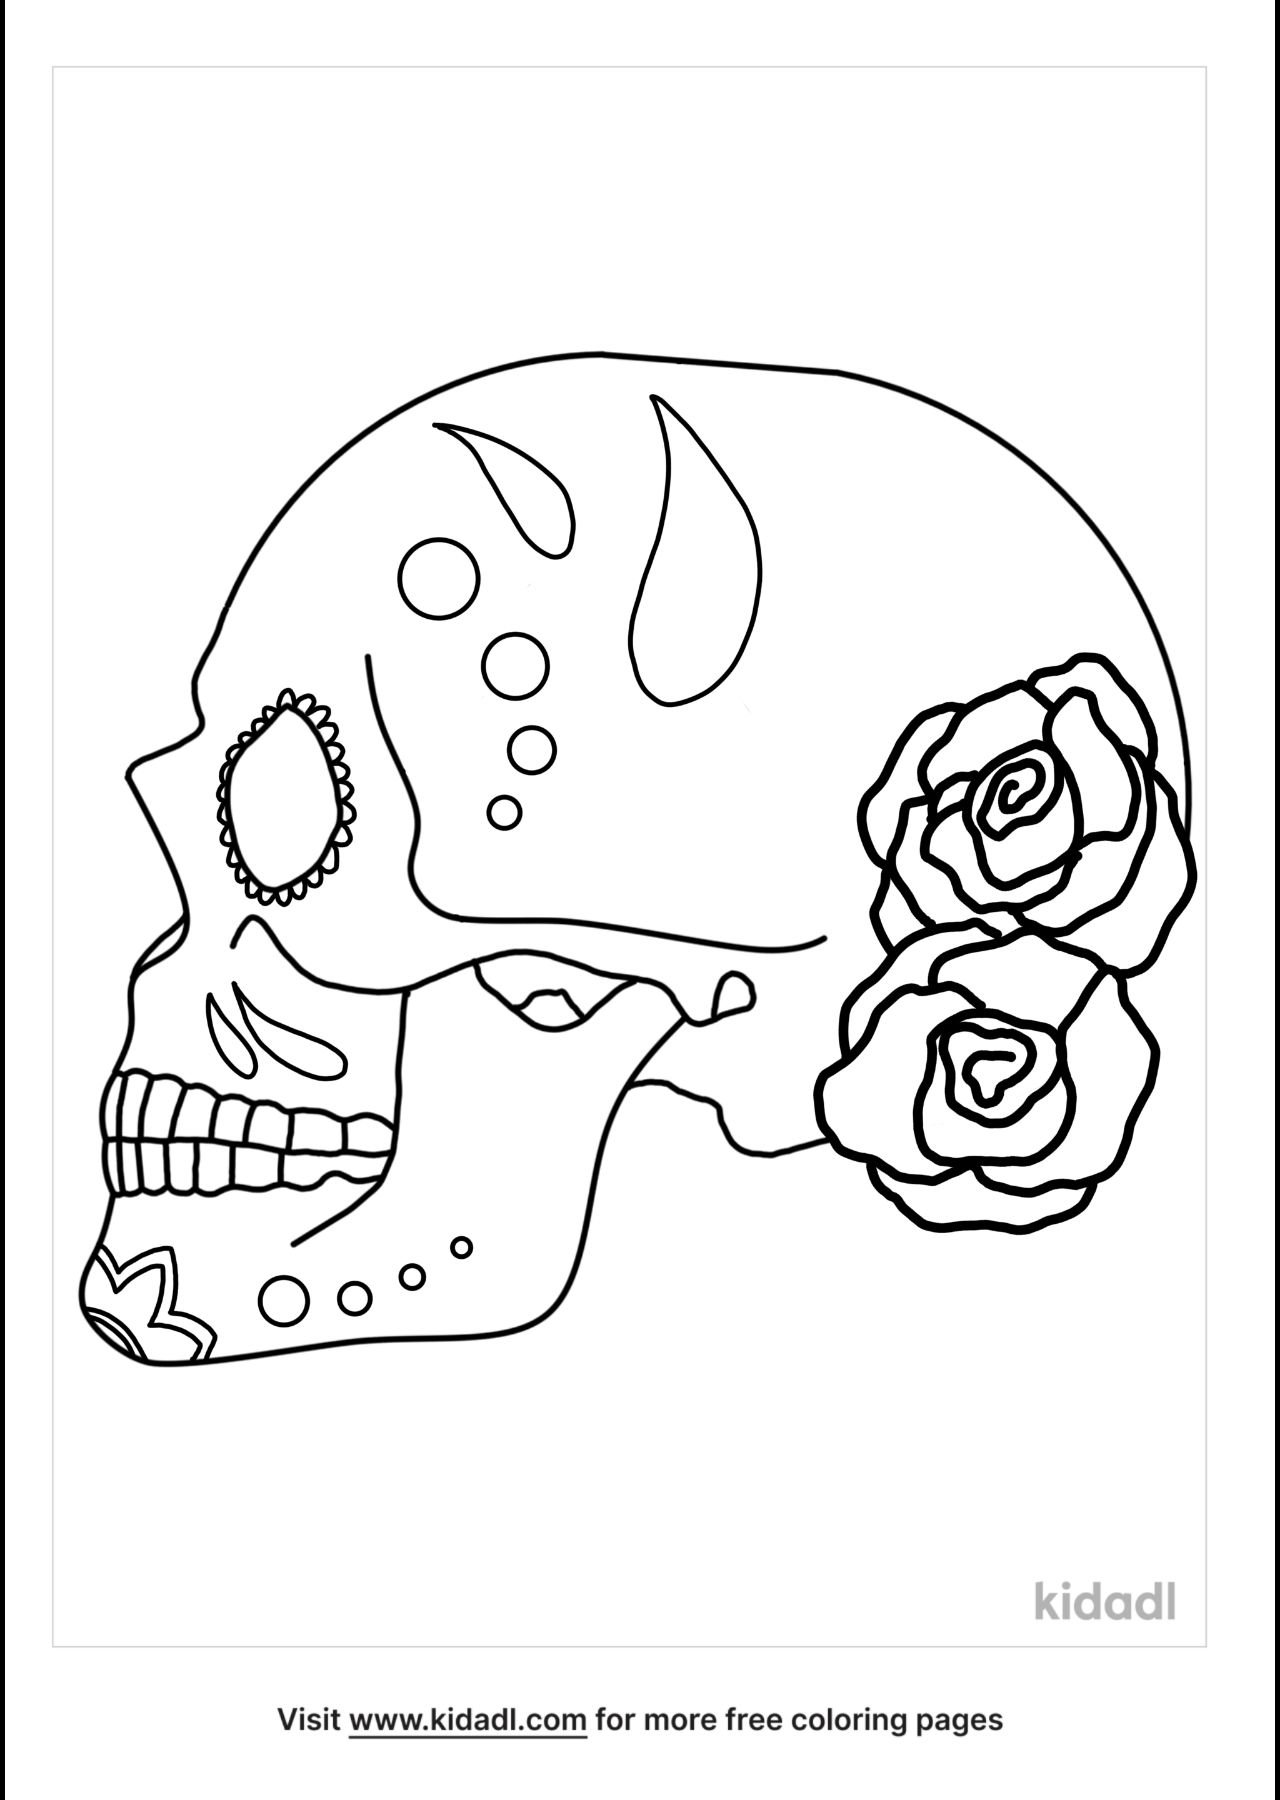 Sugar Skull Side View Coloring Pages | Free Seasonal & Celebrations Coloring  Pages | Kidadl